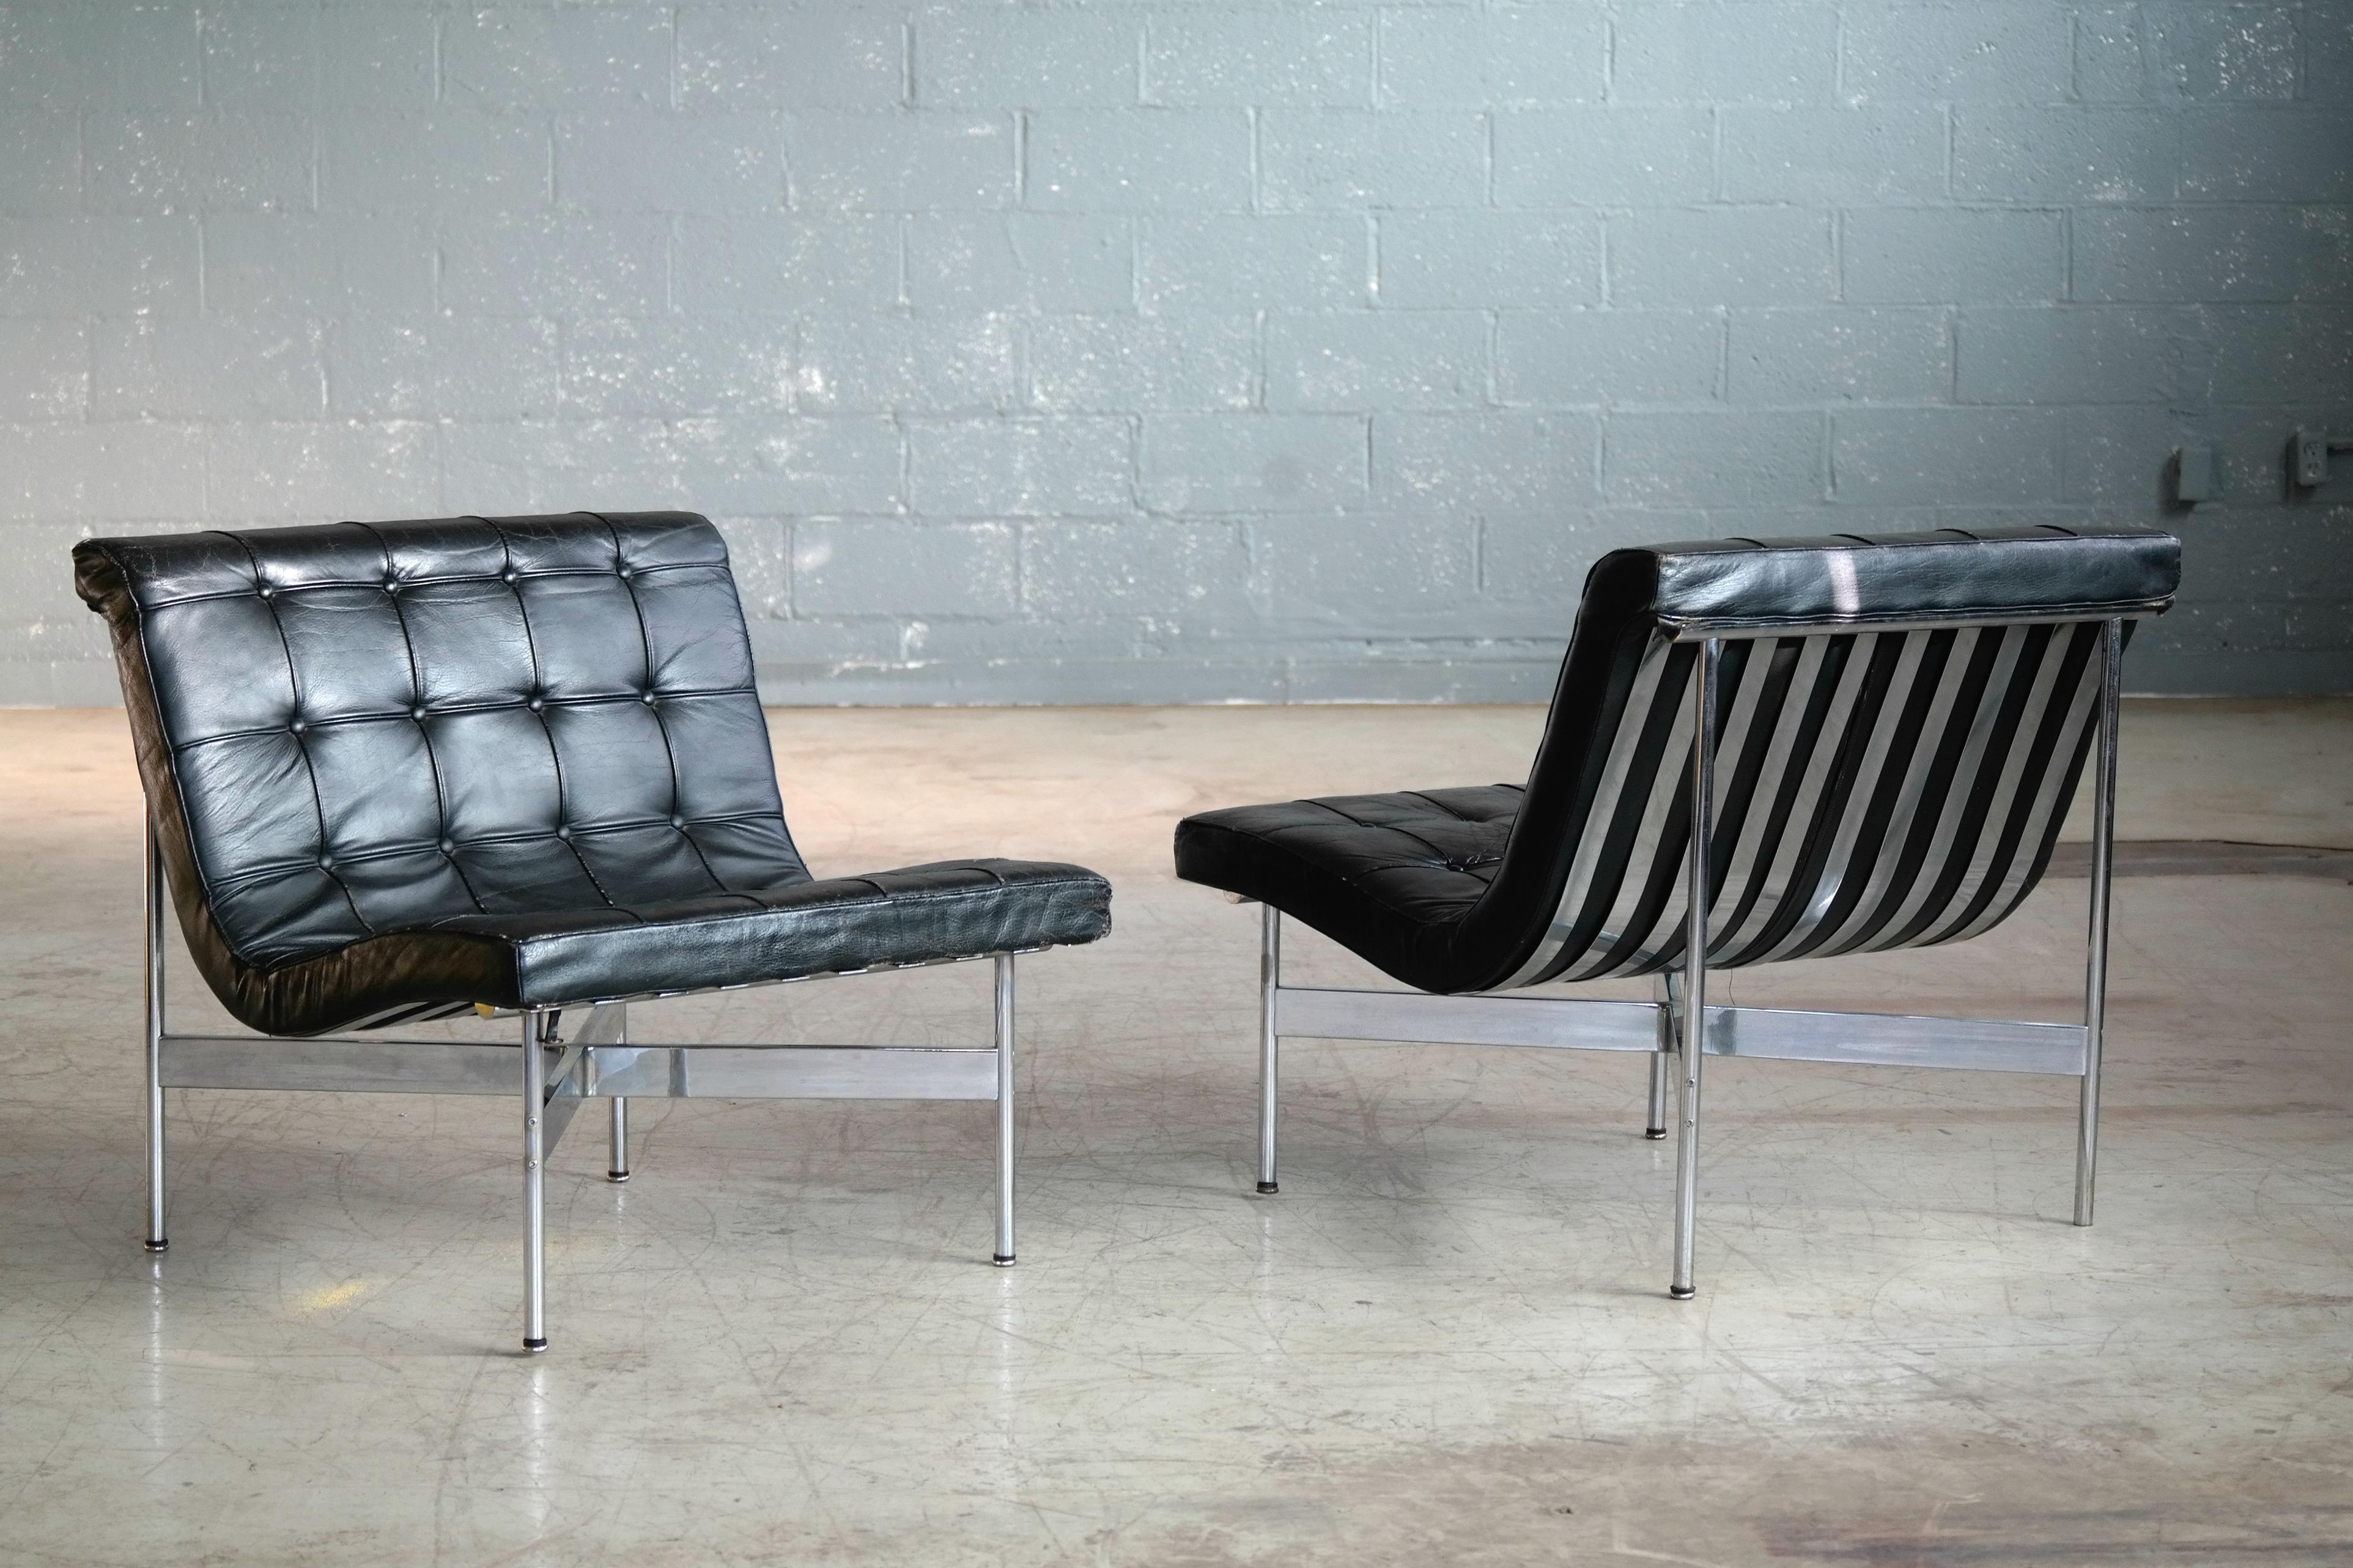 A rare and fantastic pair of original lounge chairs designed by William Katavolos, Ross Littell and Douglas Kelley for Laverne International from the Architectural Group One line in 1952. The design of the steel frame creates a fantastic open look